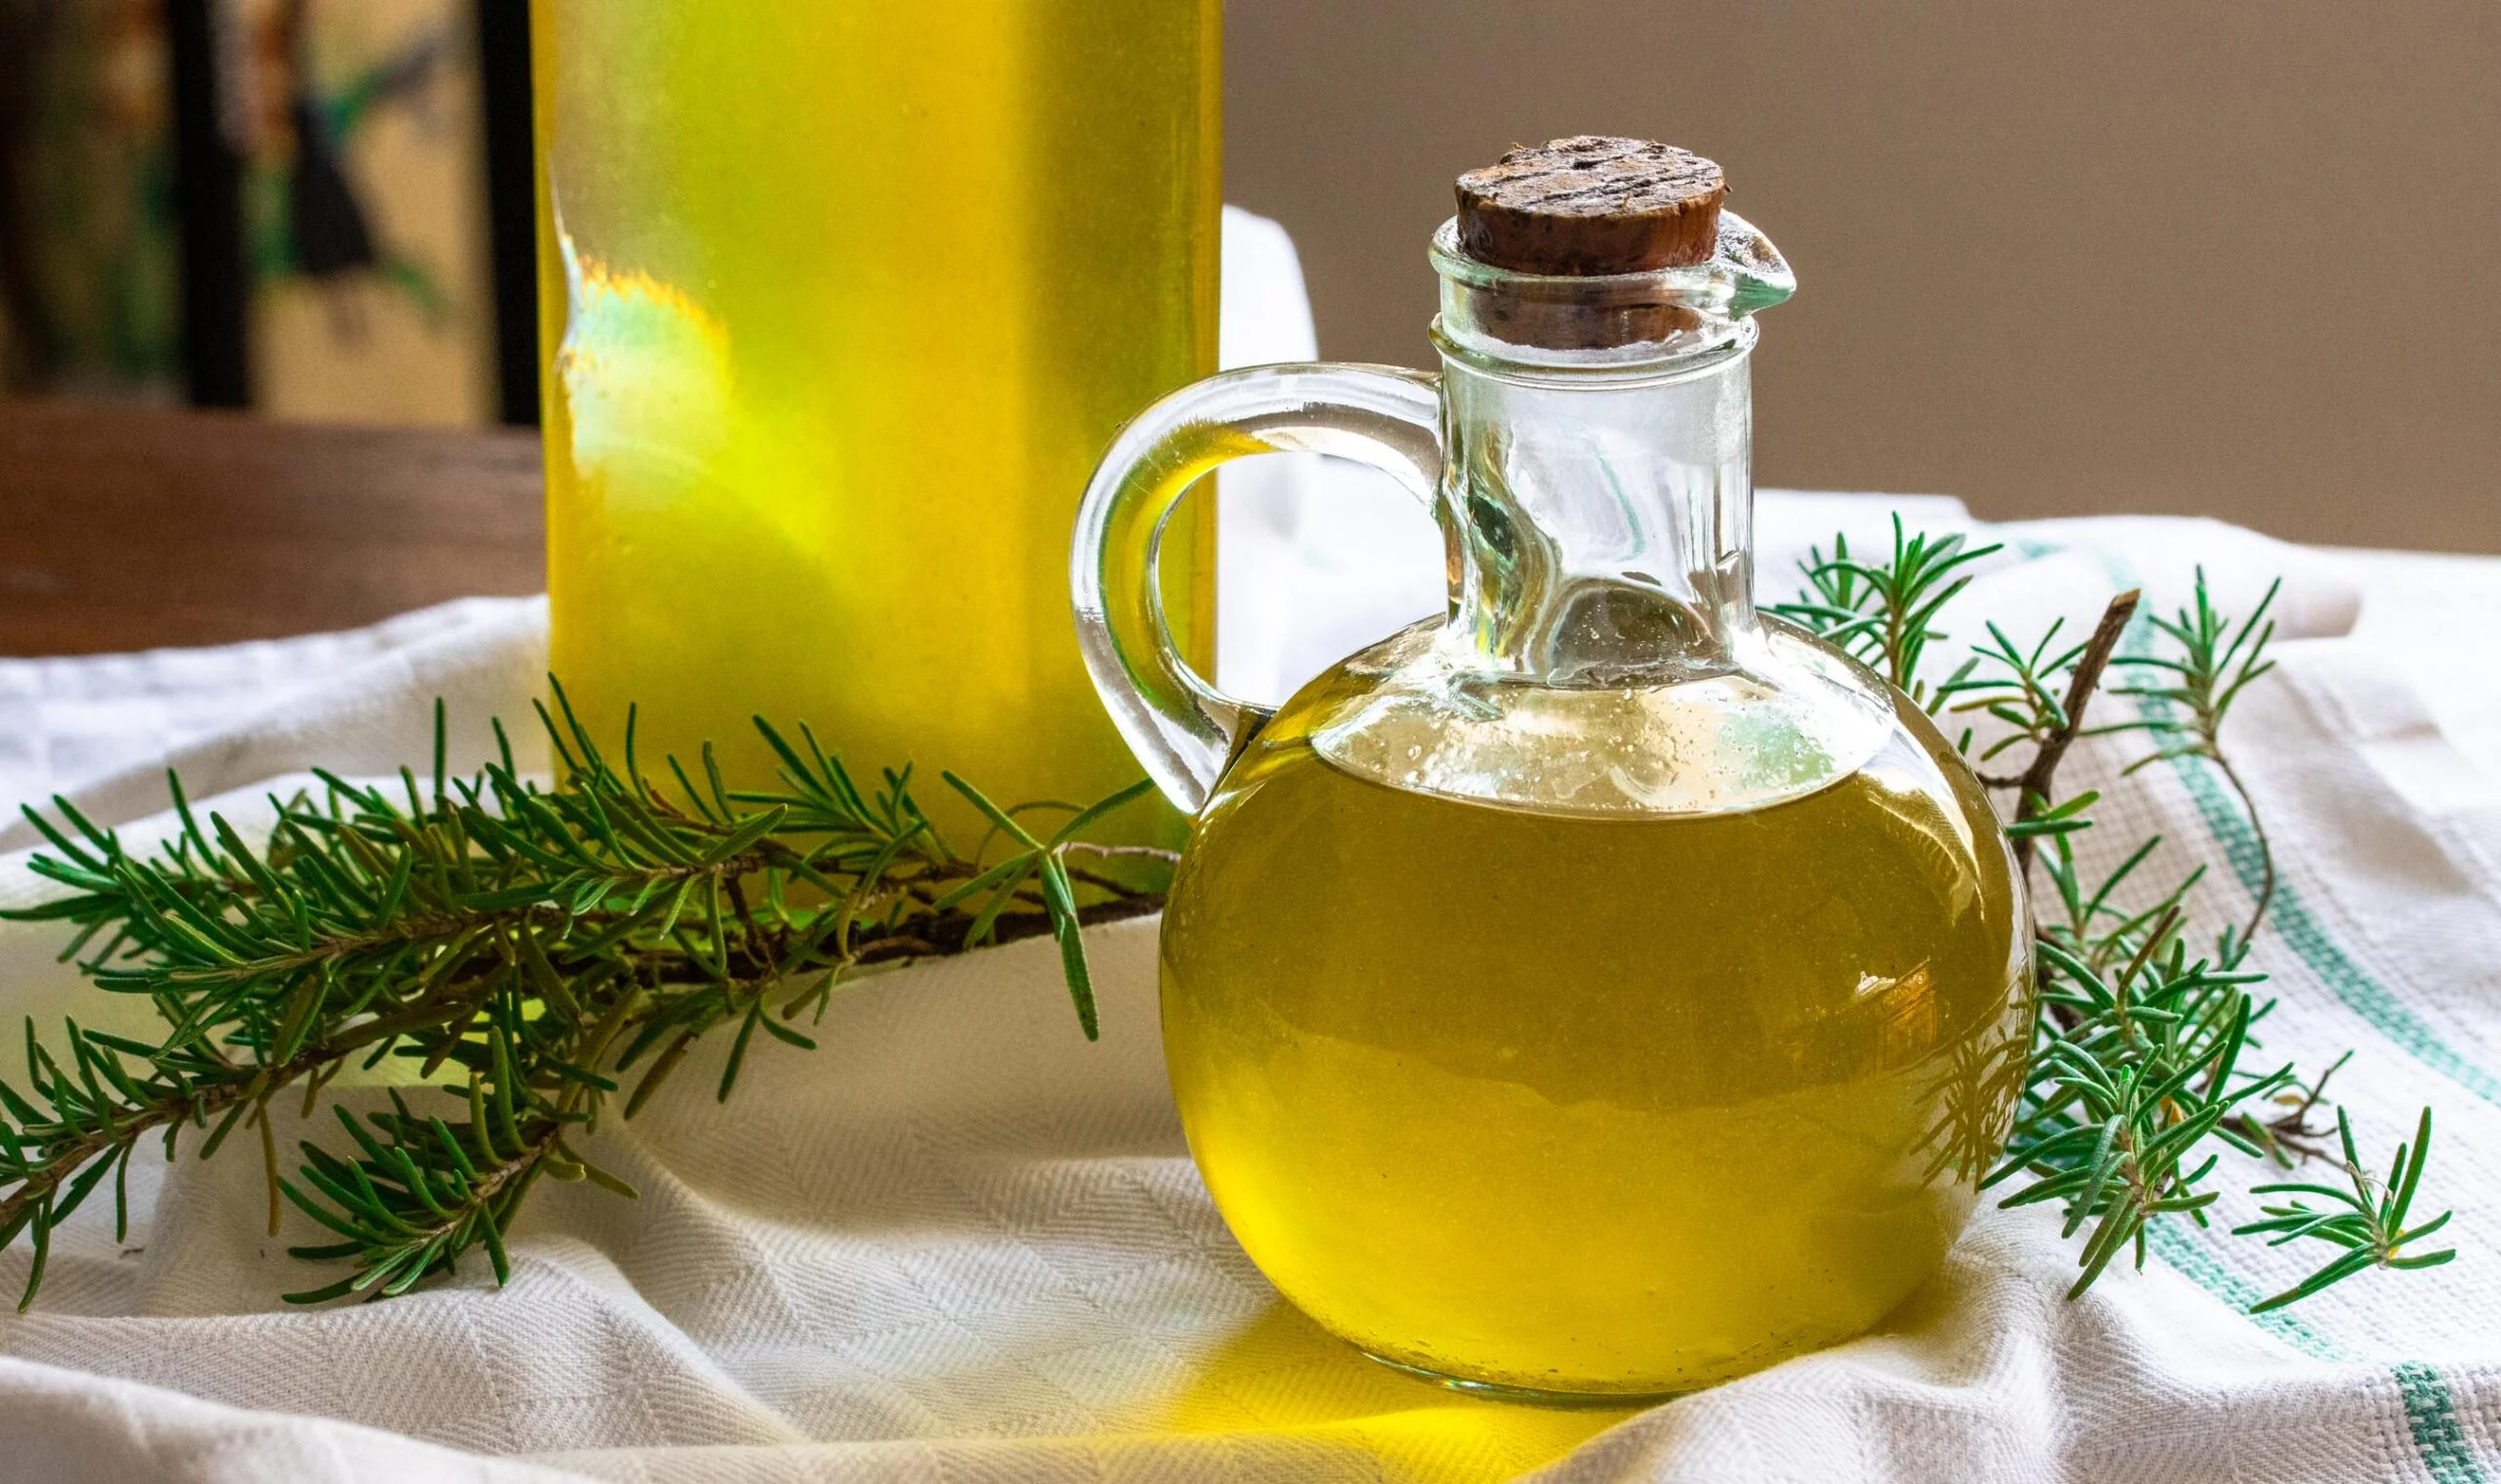 Olive oil and rosemary oil